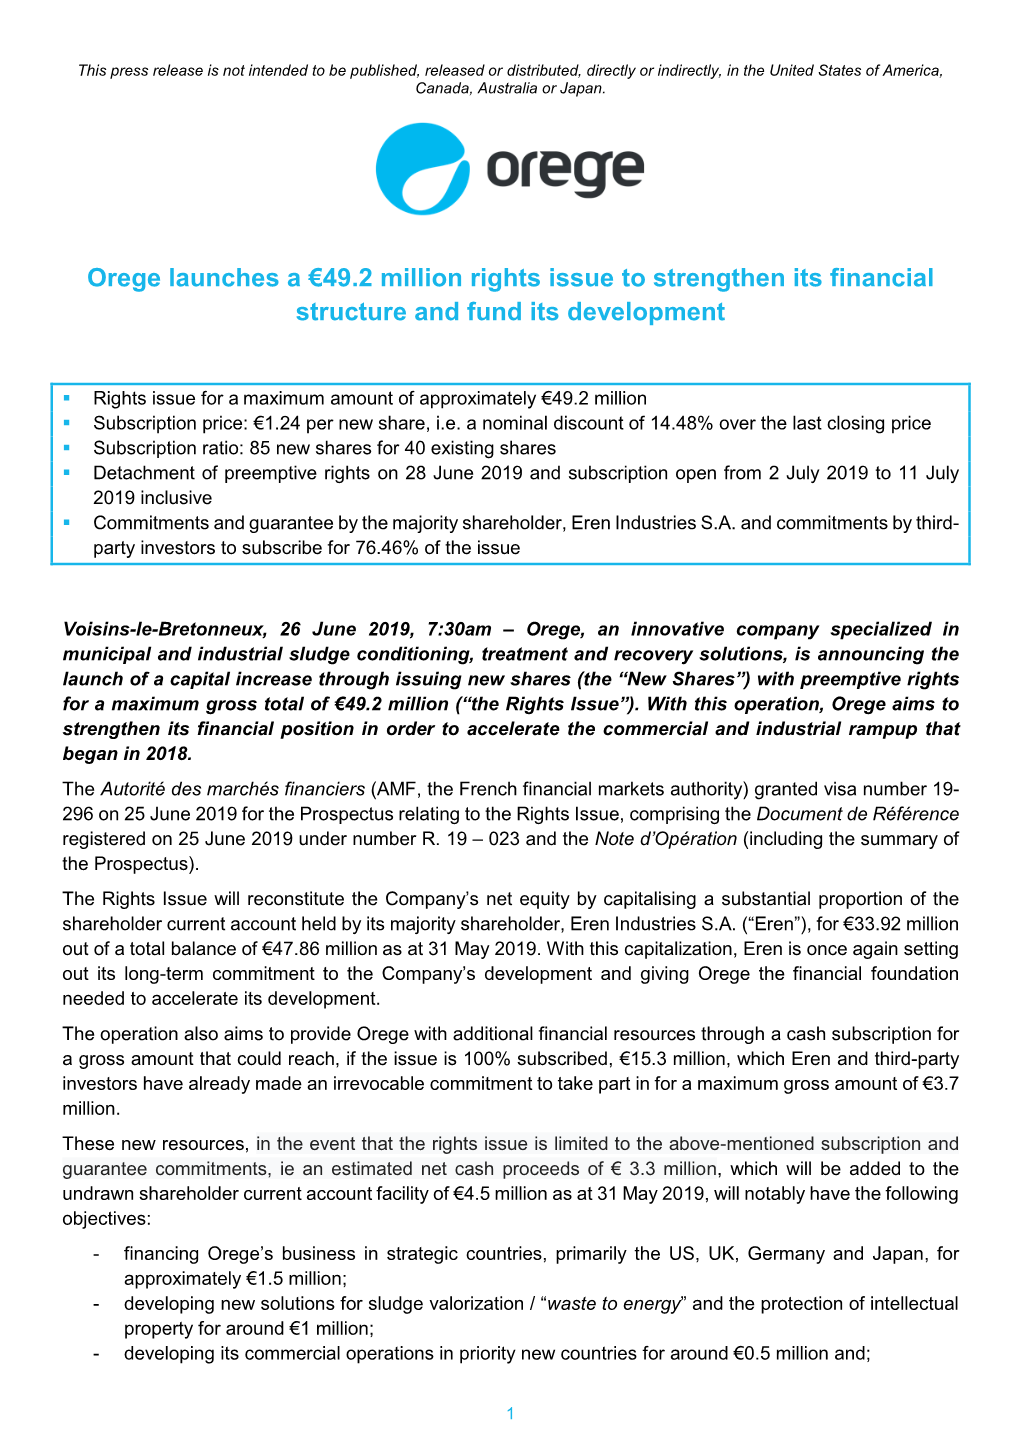 Orege Launches a €49.2 Million Rights Issue to Strengthen Its Financial Structure and Fund Its Development